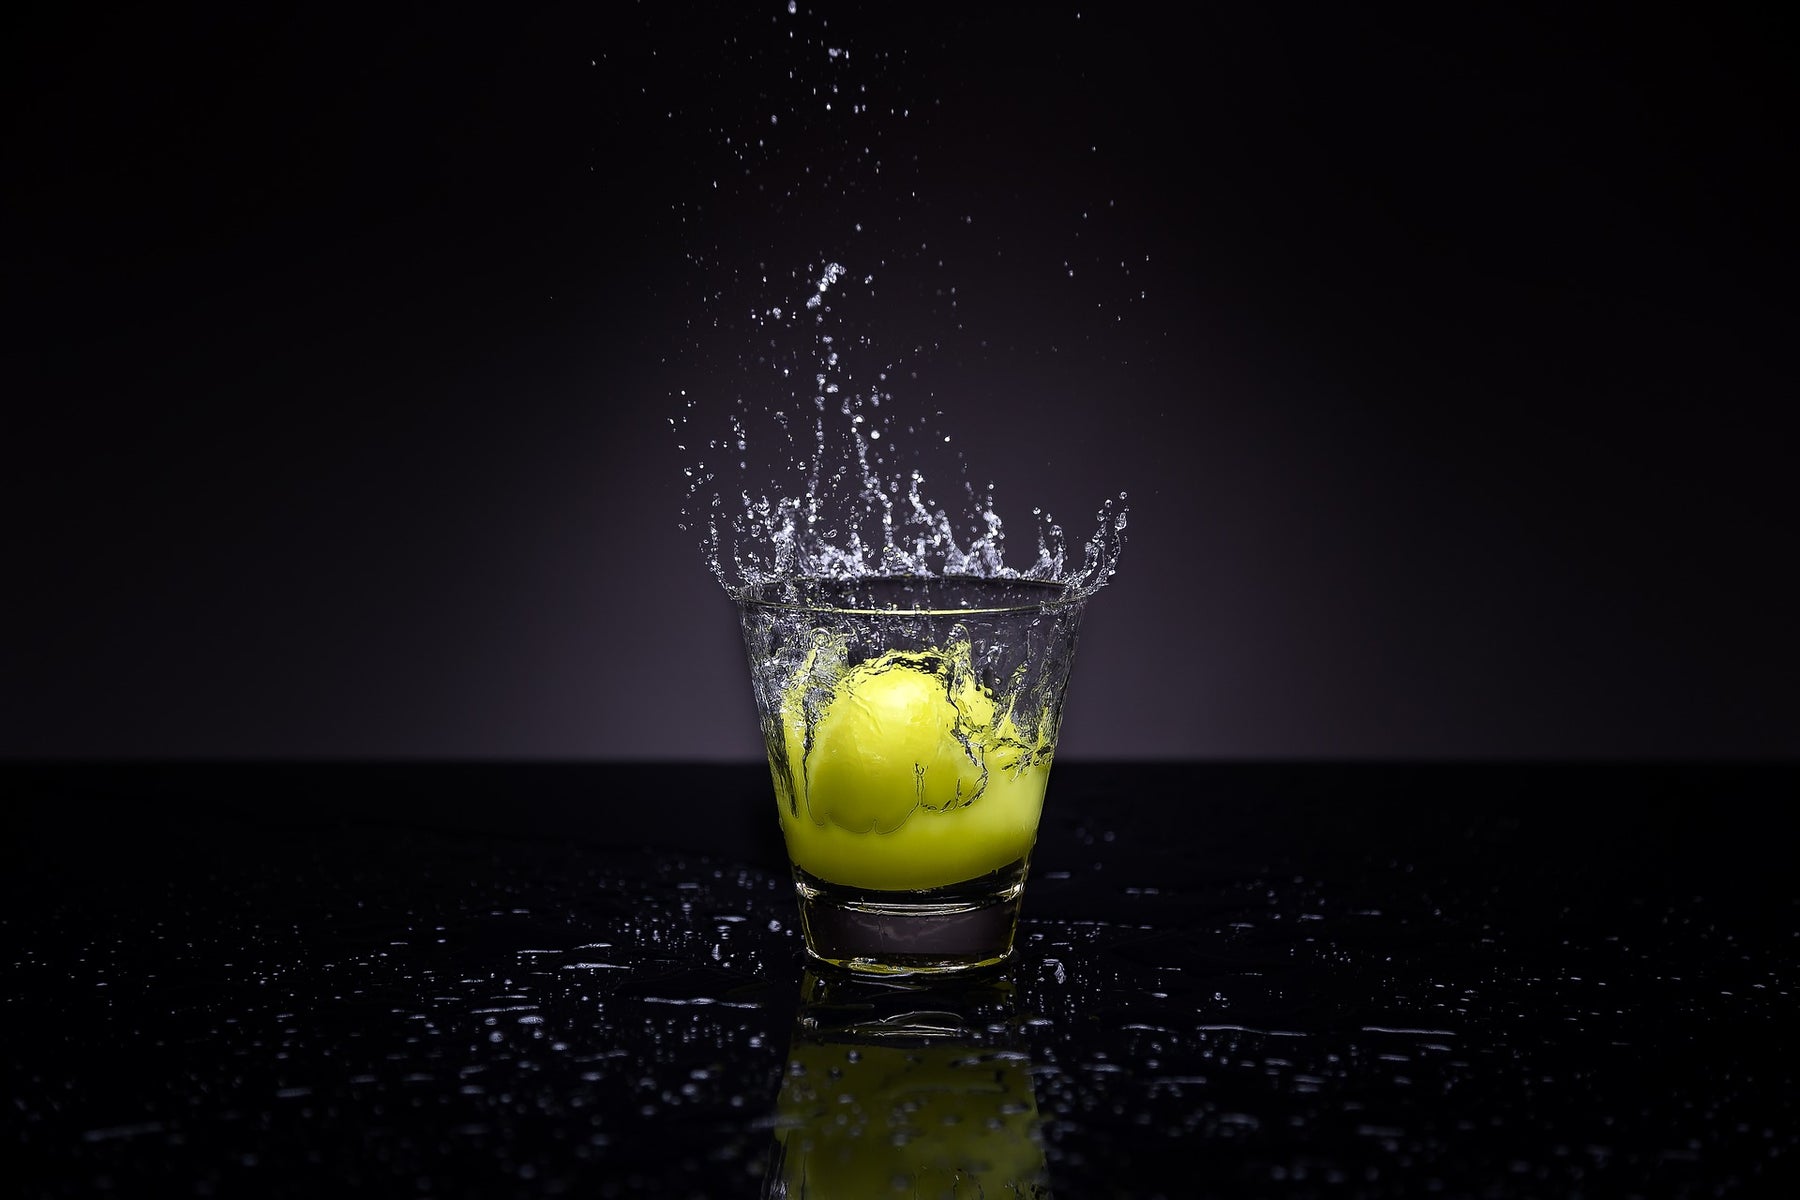 Lemon thrown in a glass of water over a black background